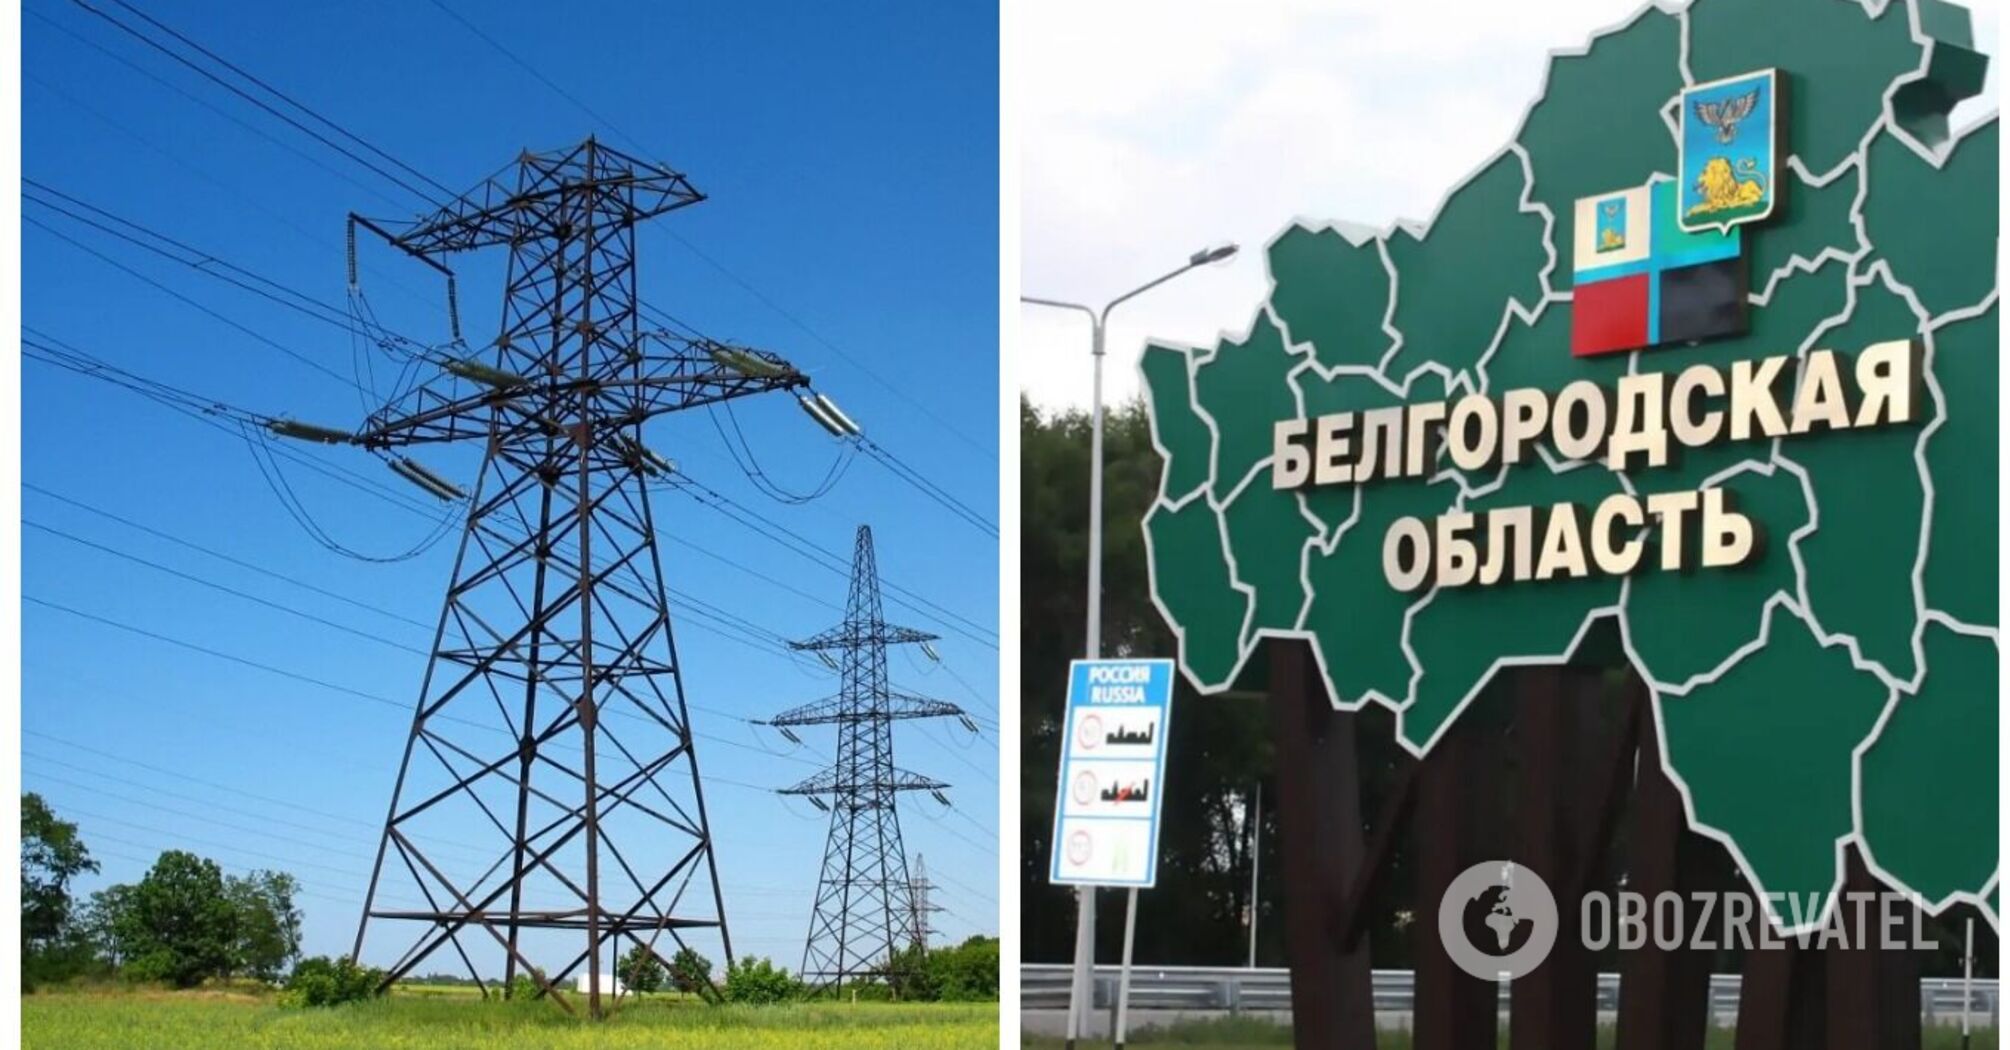 'Do we have to take Kyiv?' Power outages in Belgorod and Kursk regions, Russians are hysterical